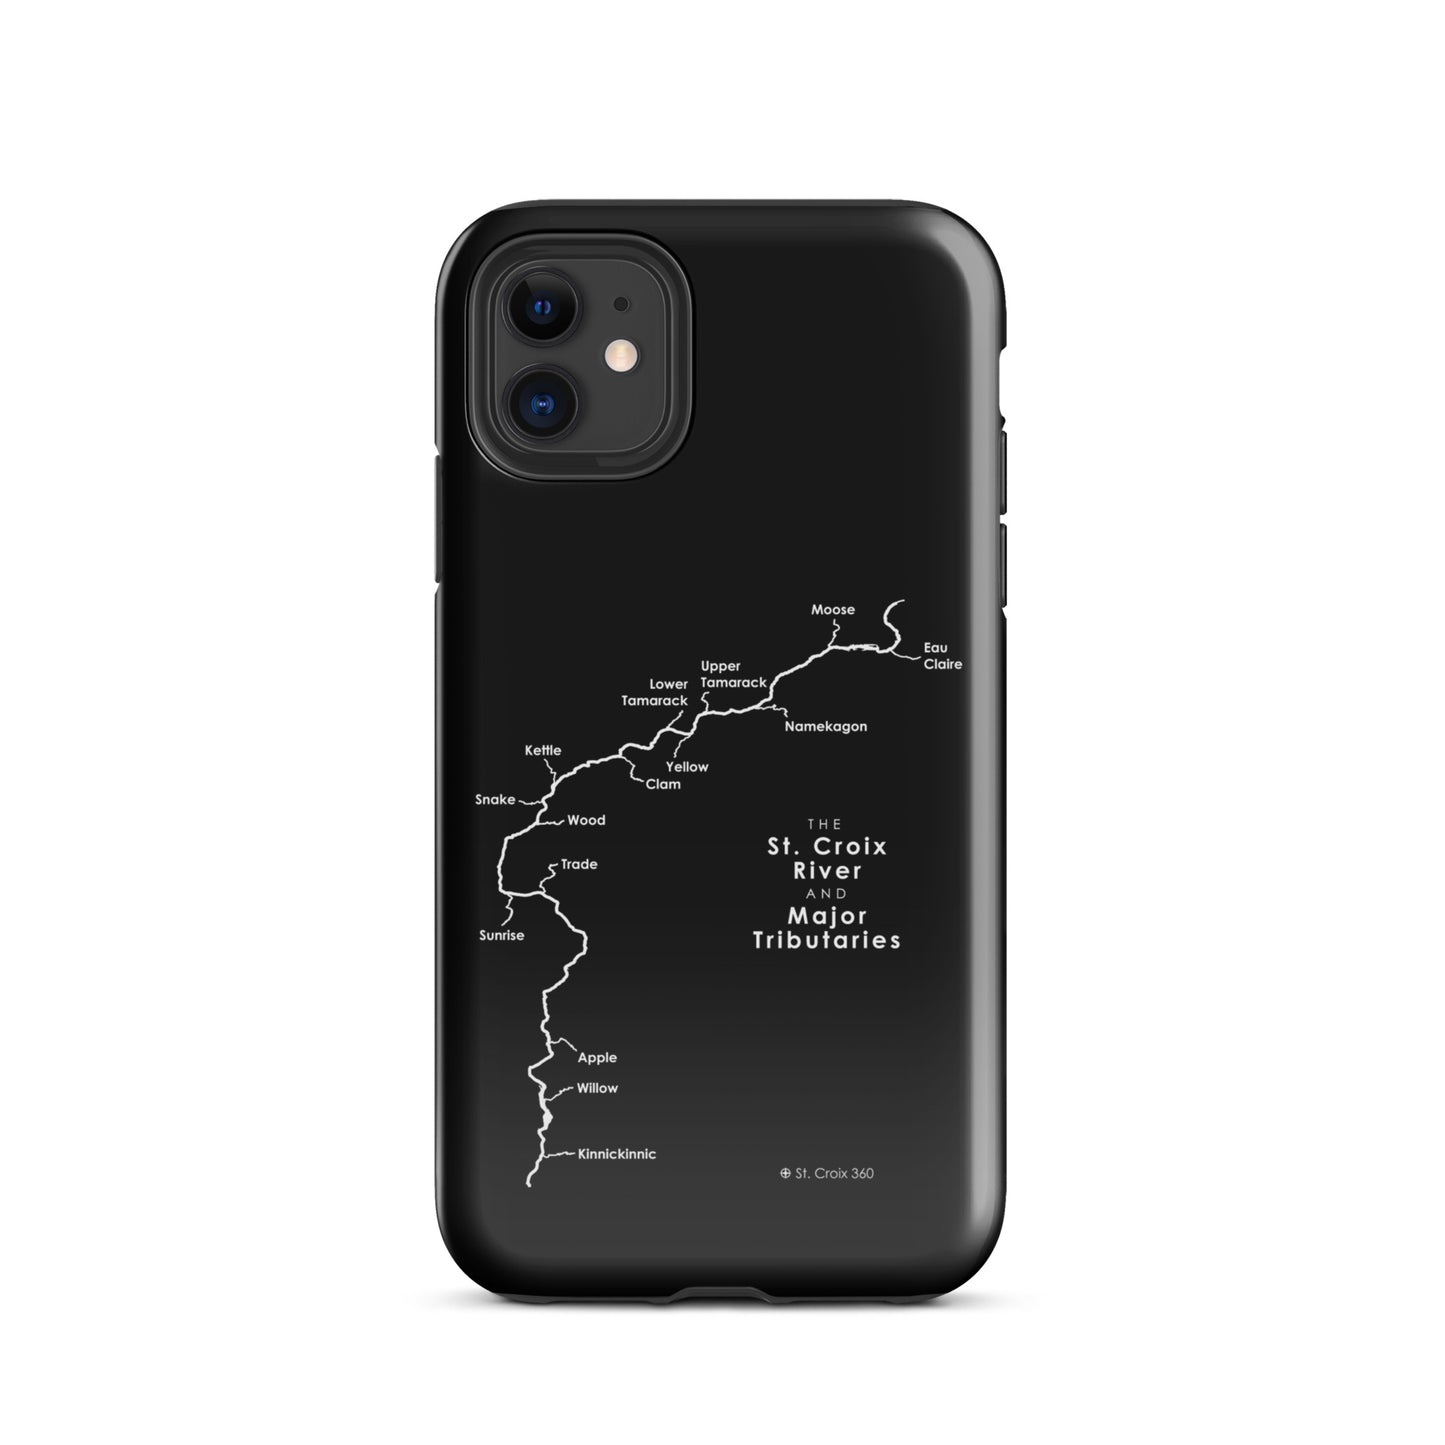 St. Croix River and Tributaries Tough Case for iPhones®